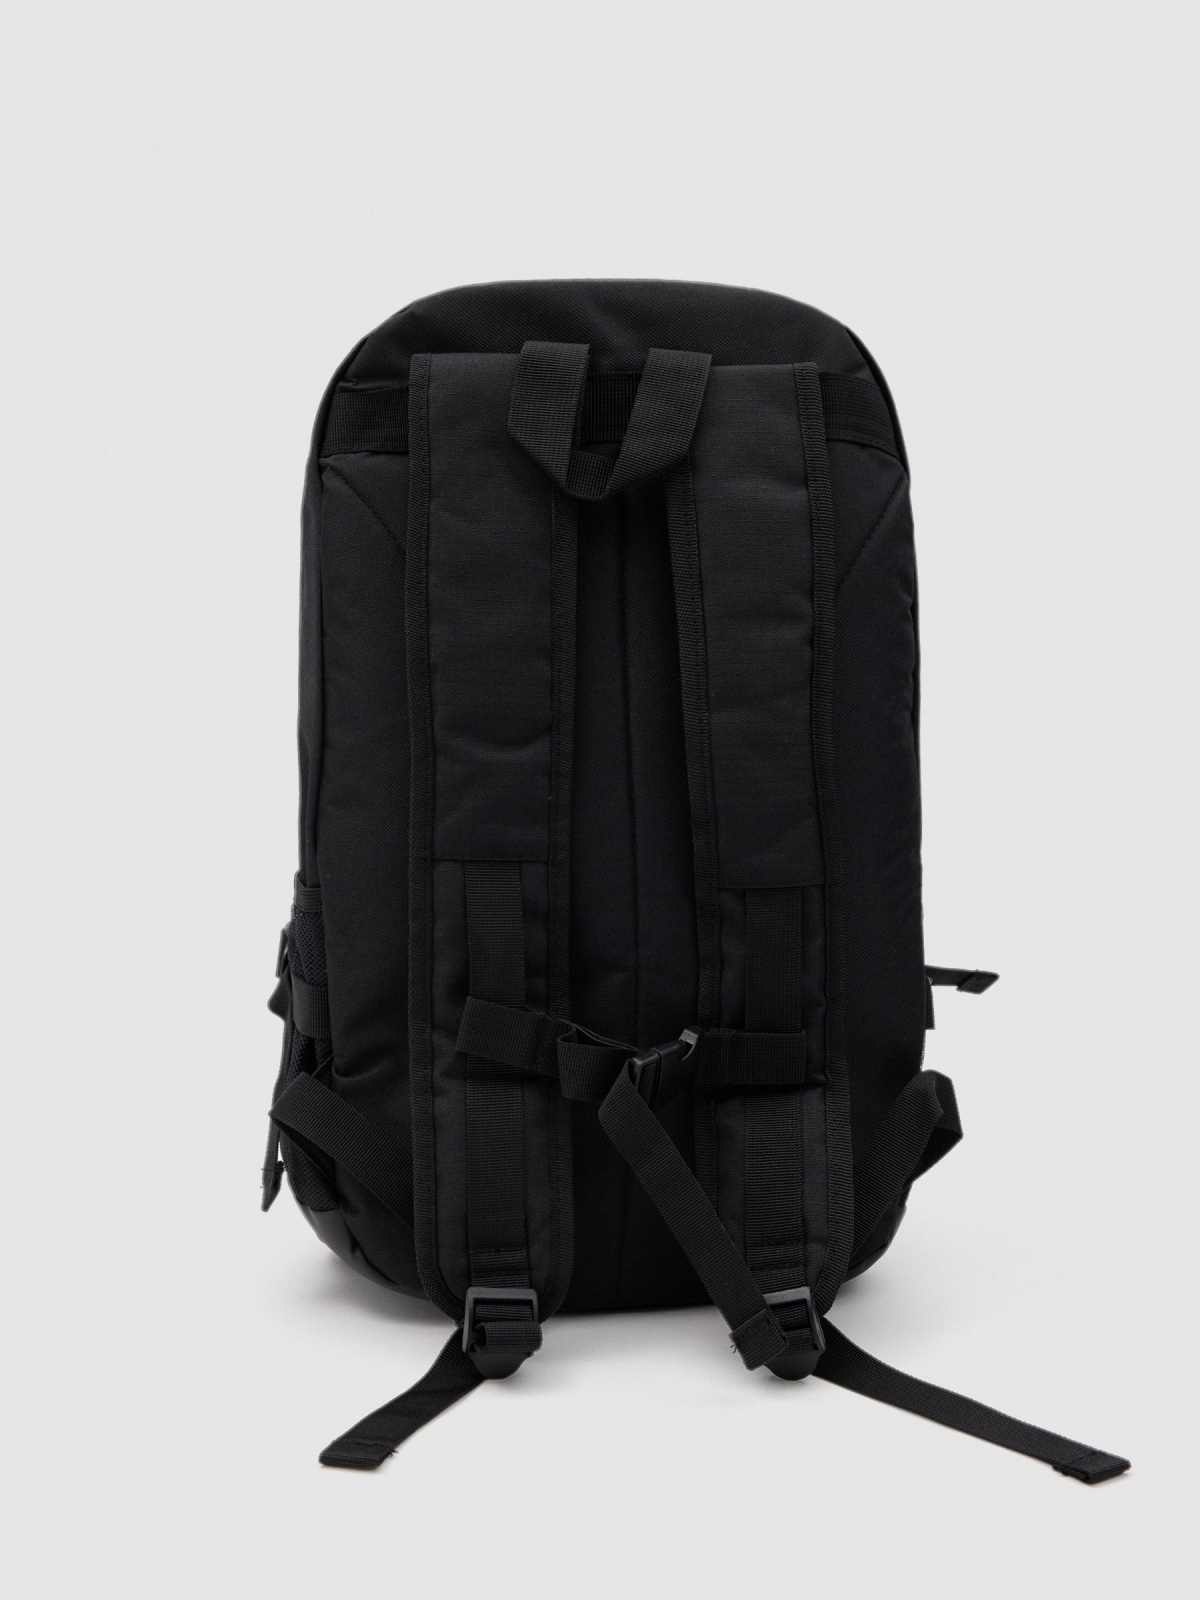 Polyester sports backpack black 45º side view